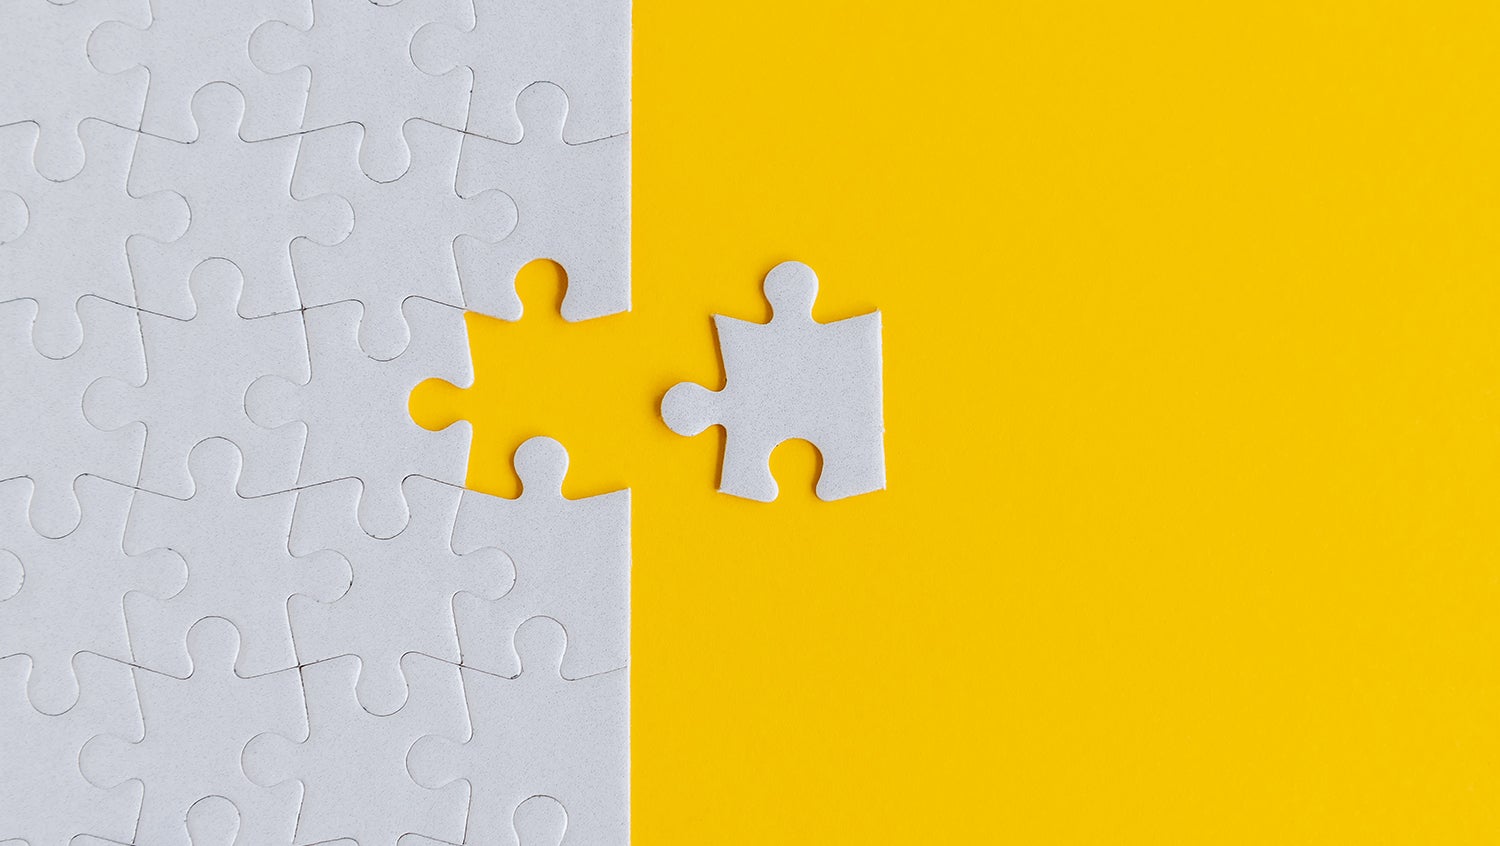 The final puzzle piece sits next to the otherwise completed white puzzle on a yellow background